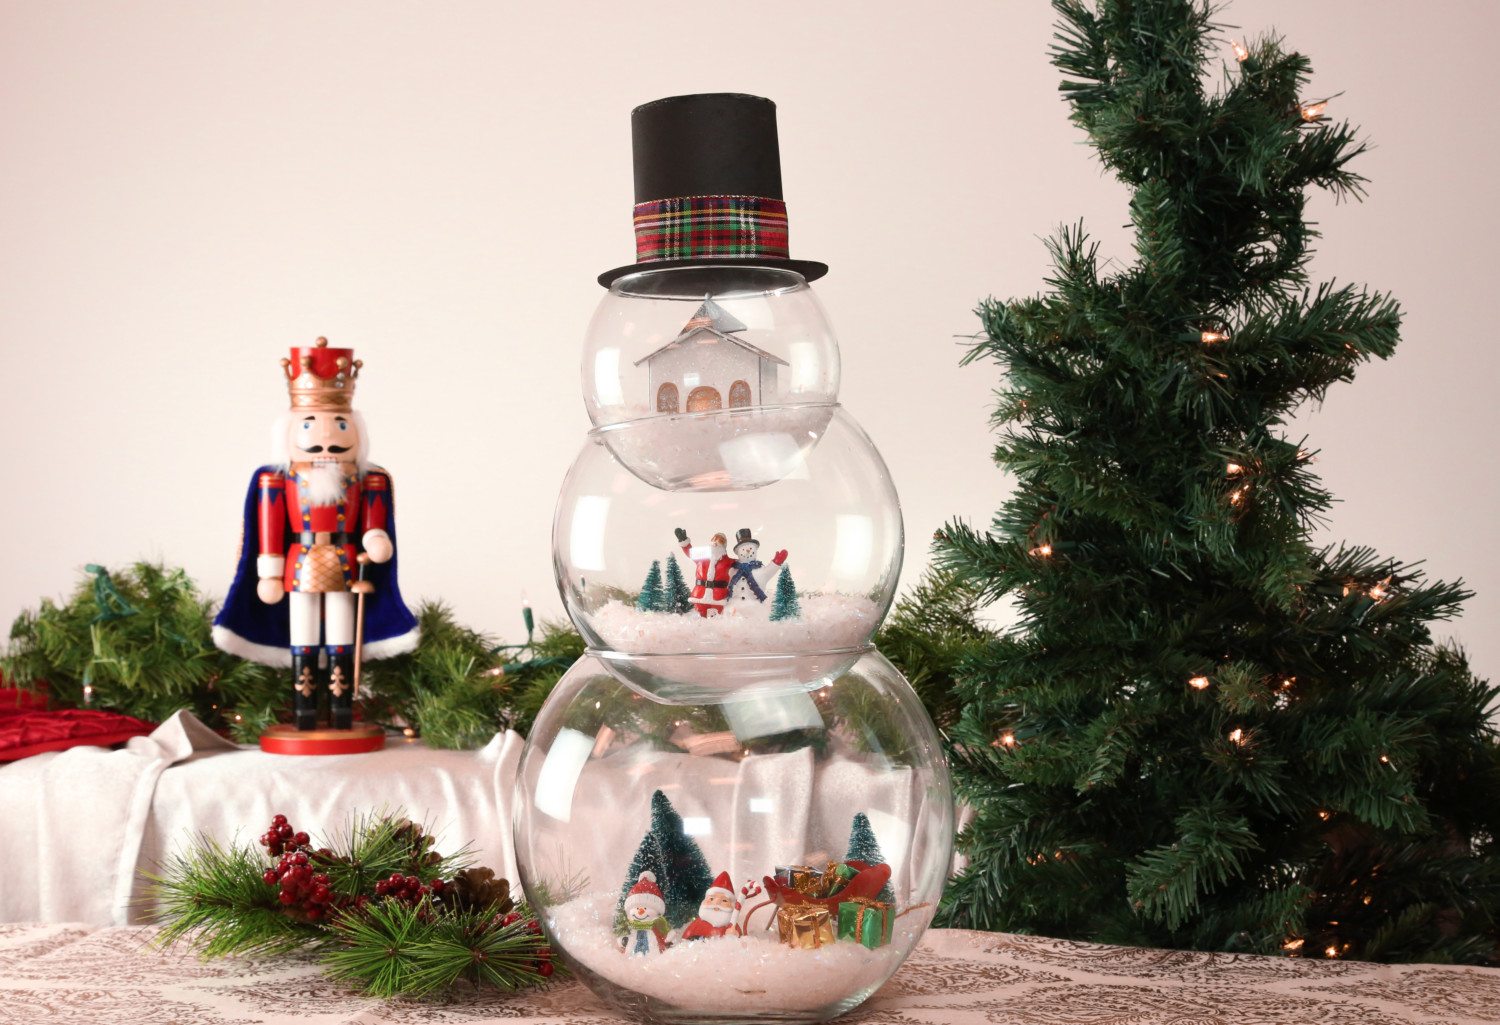 Christmas Craft: How To Make A Fishbowl Snowman - Simplemost